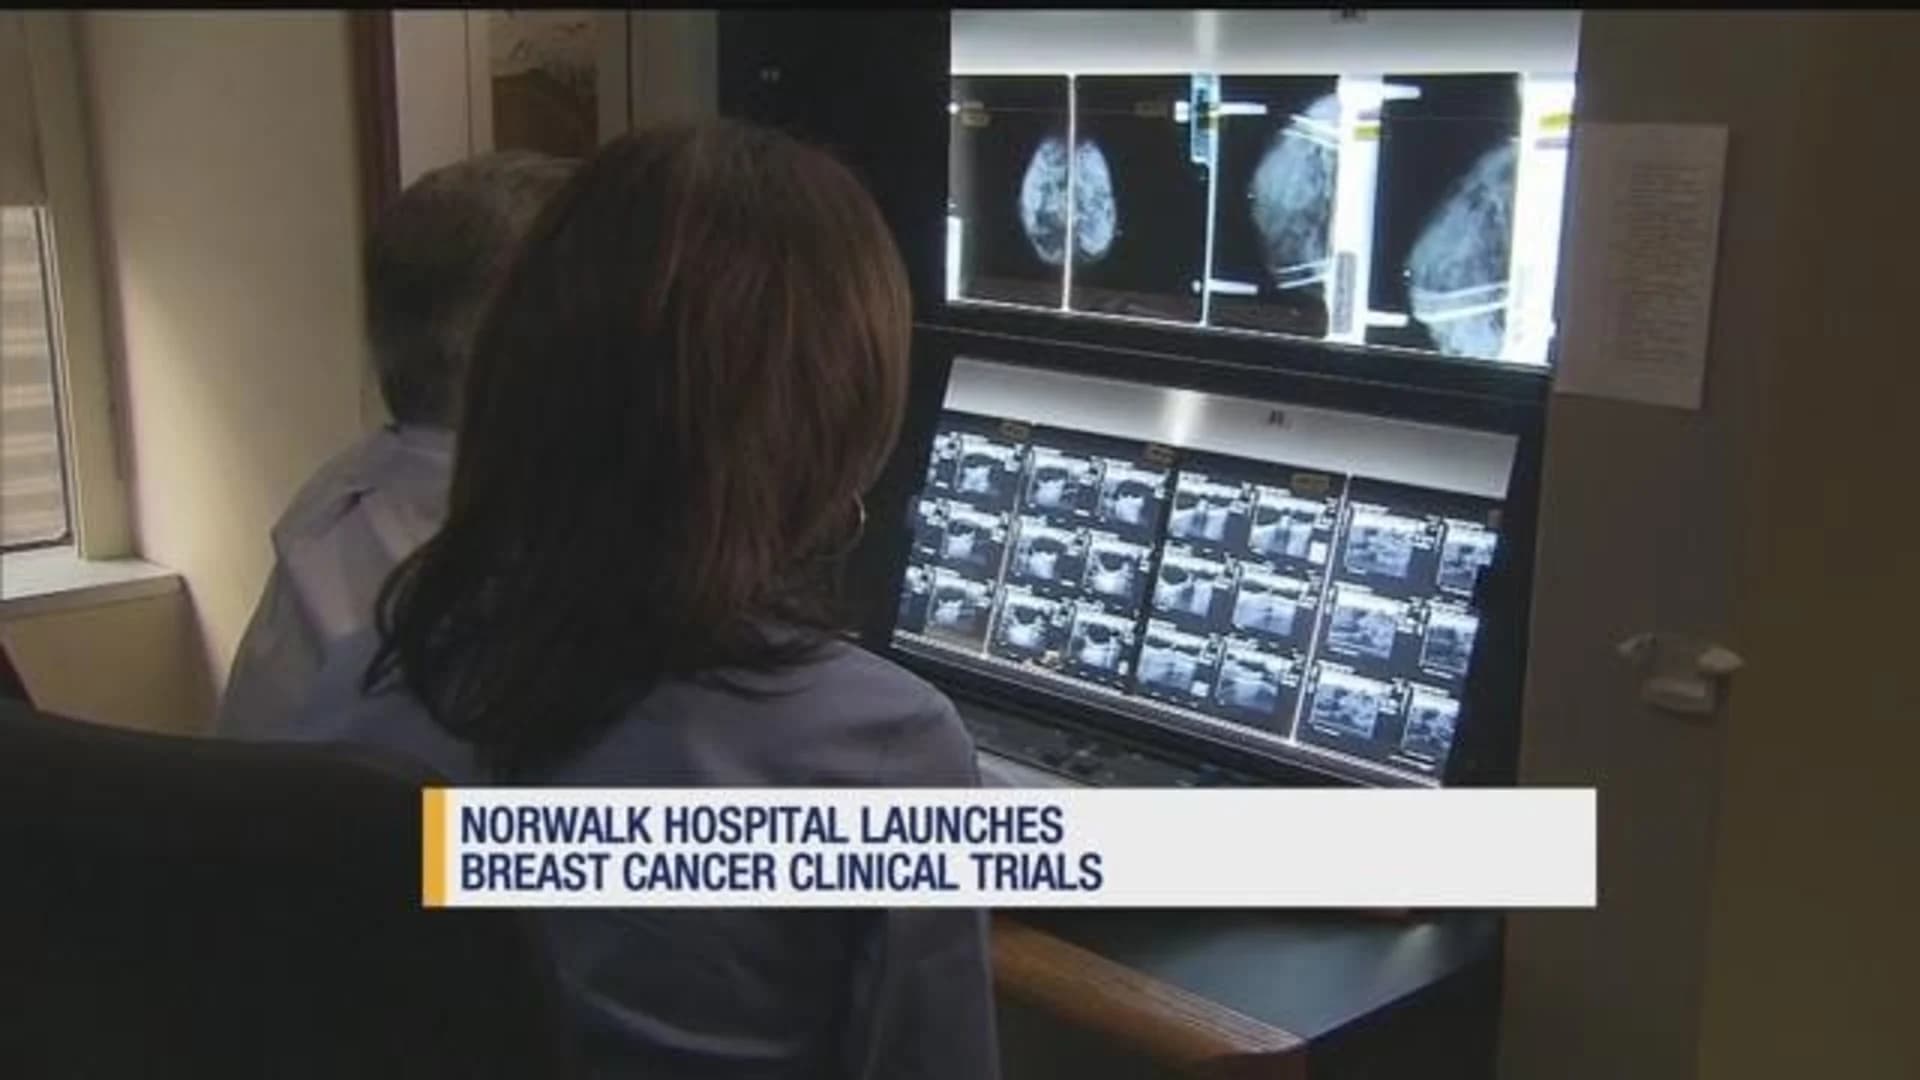 Norwalk hospital launches breast cancer clinical trials